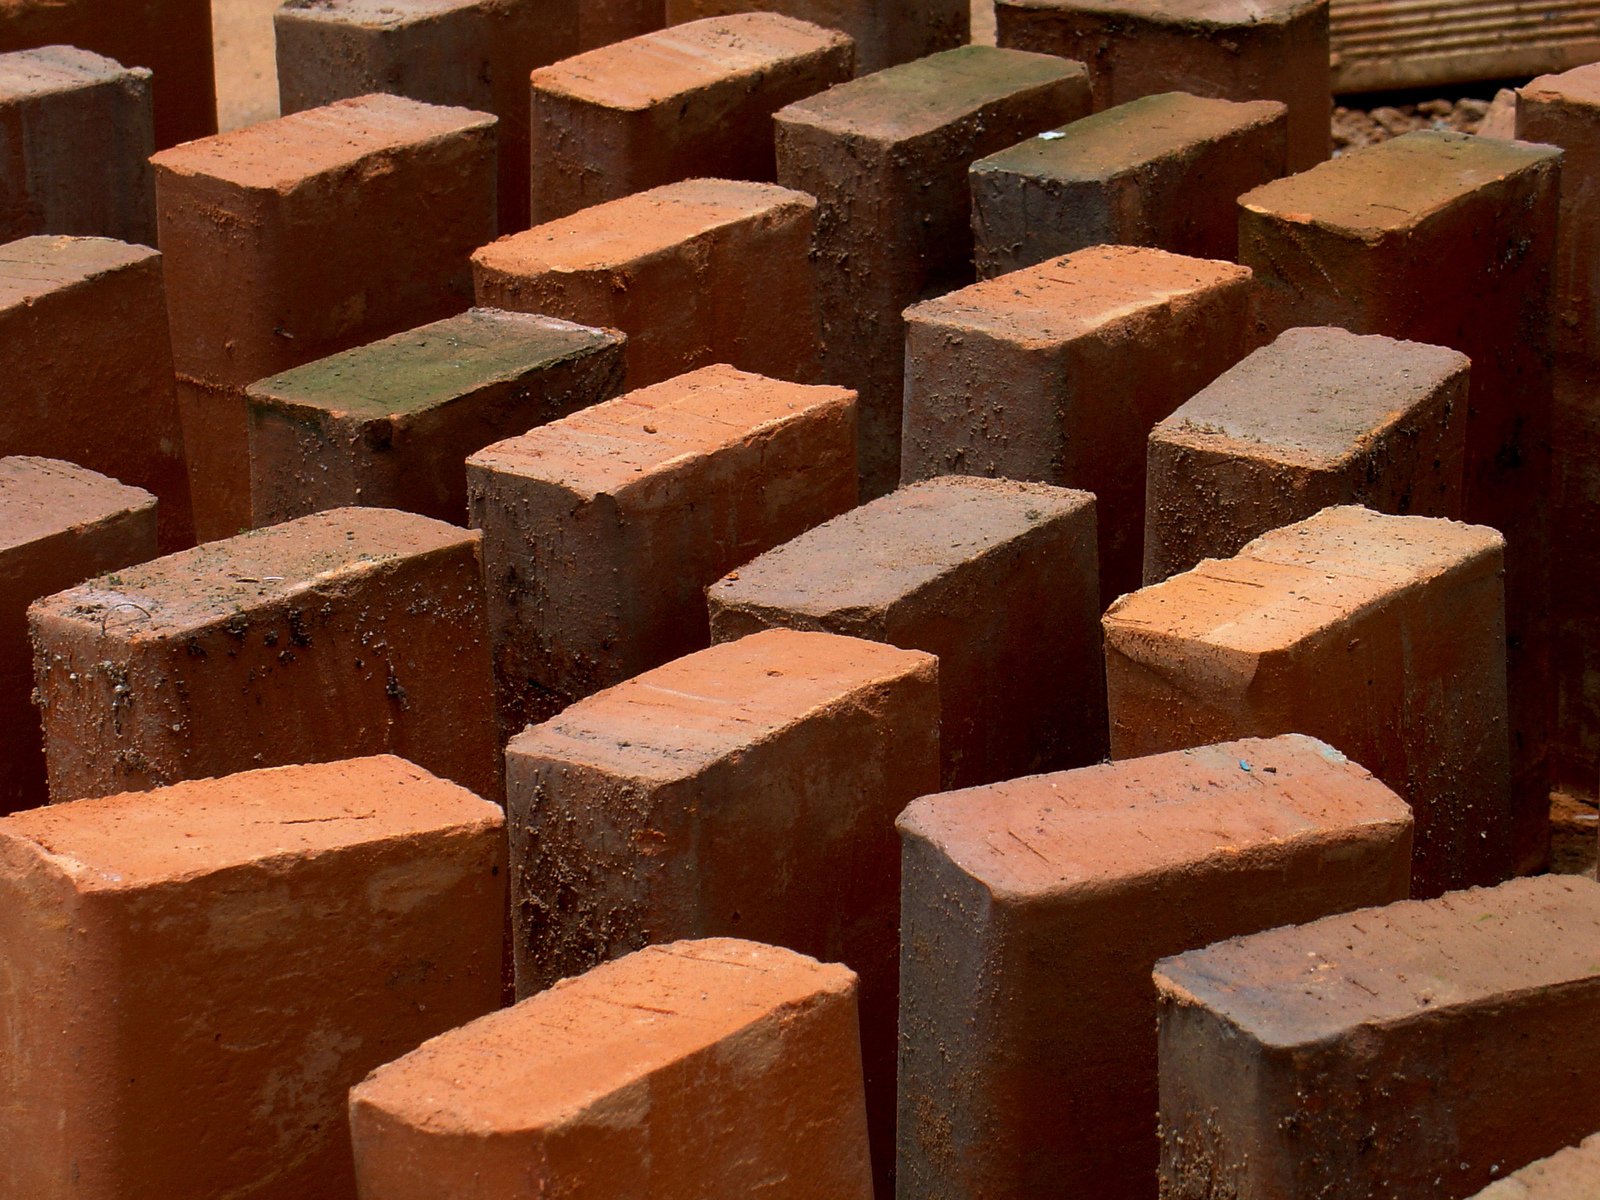 bricks with green caps sit together in rows